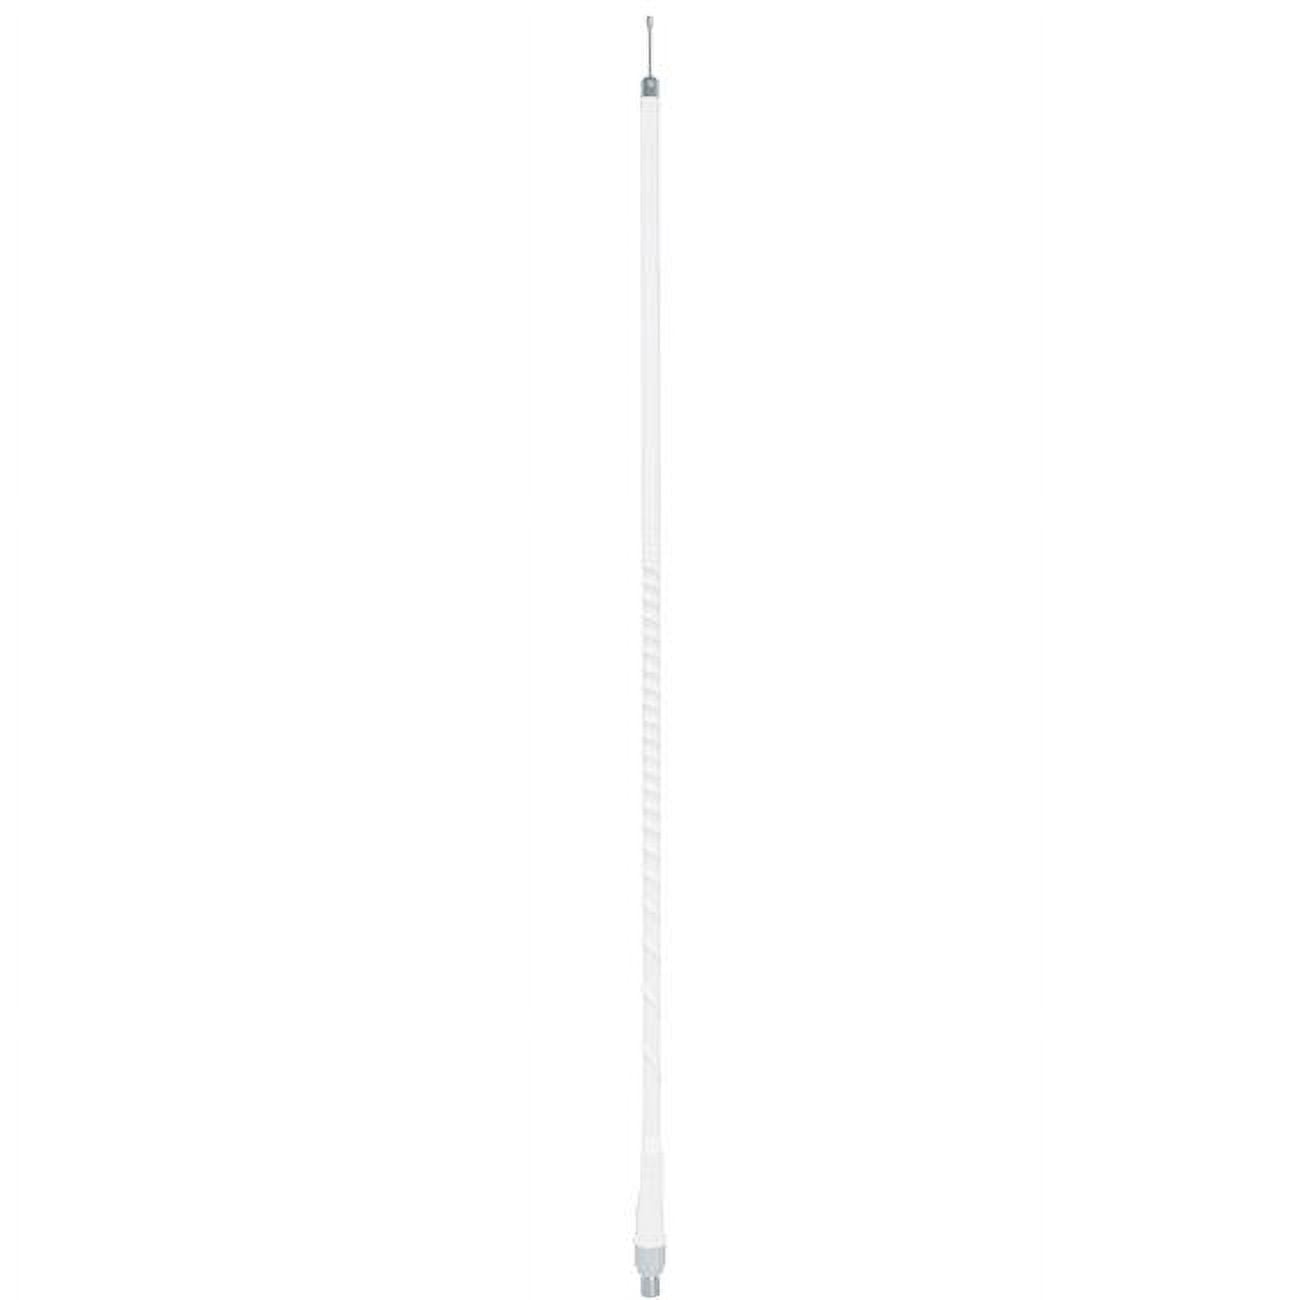 Picture of Accessories Unlimited AUFLEX3-W 0.38 x 24 in. 3 ft. Superflex CB Antenna with Tunable Tip, White